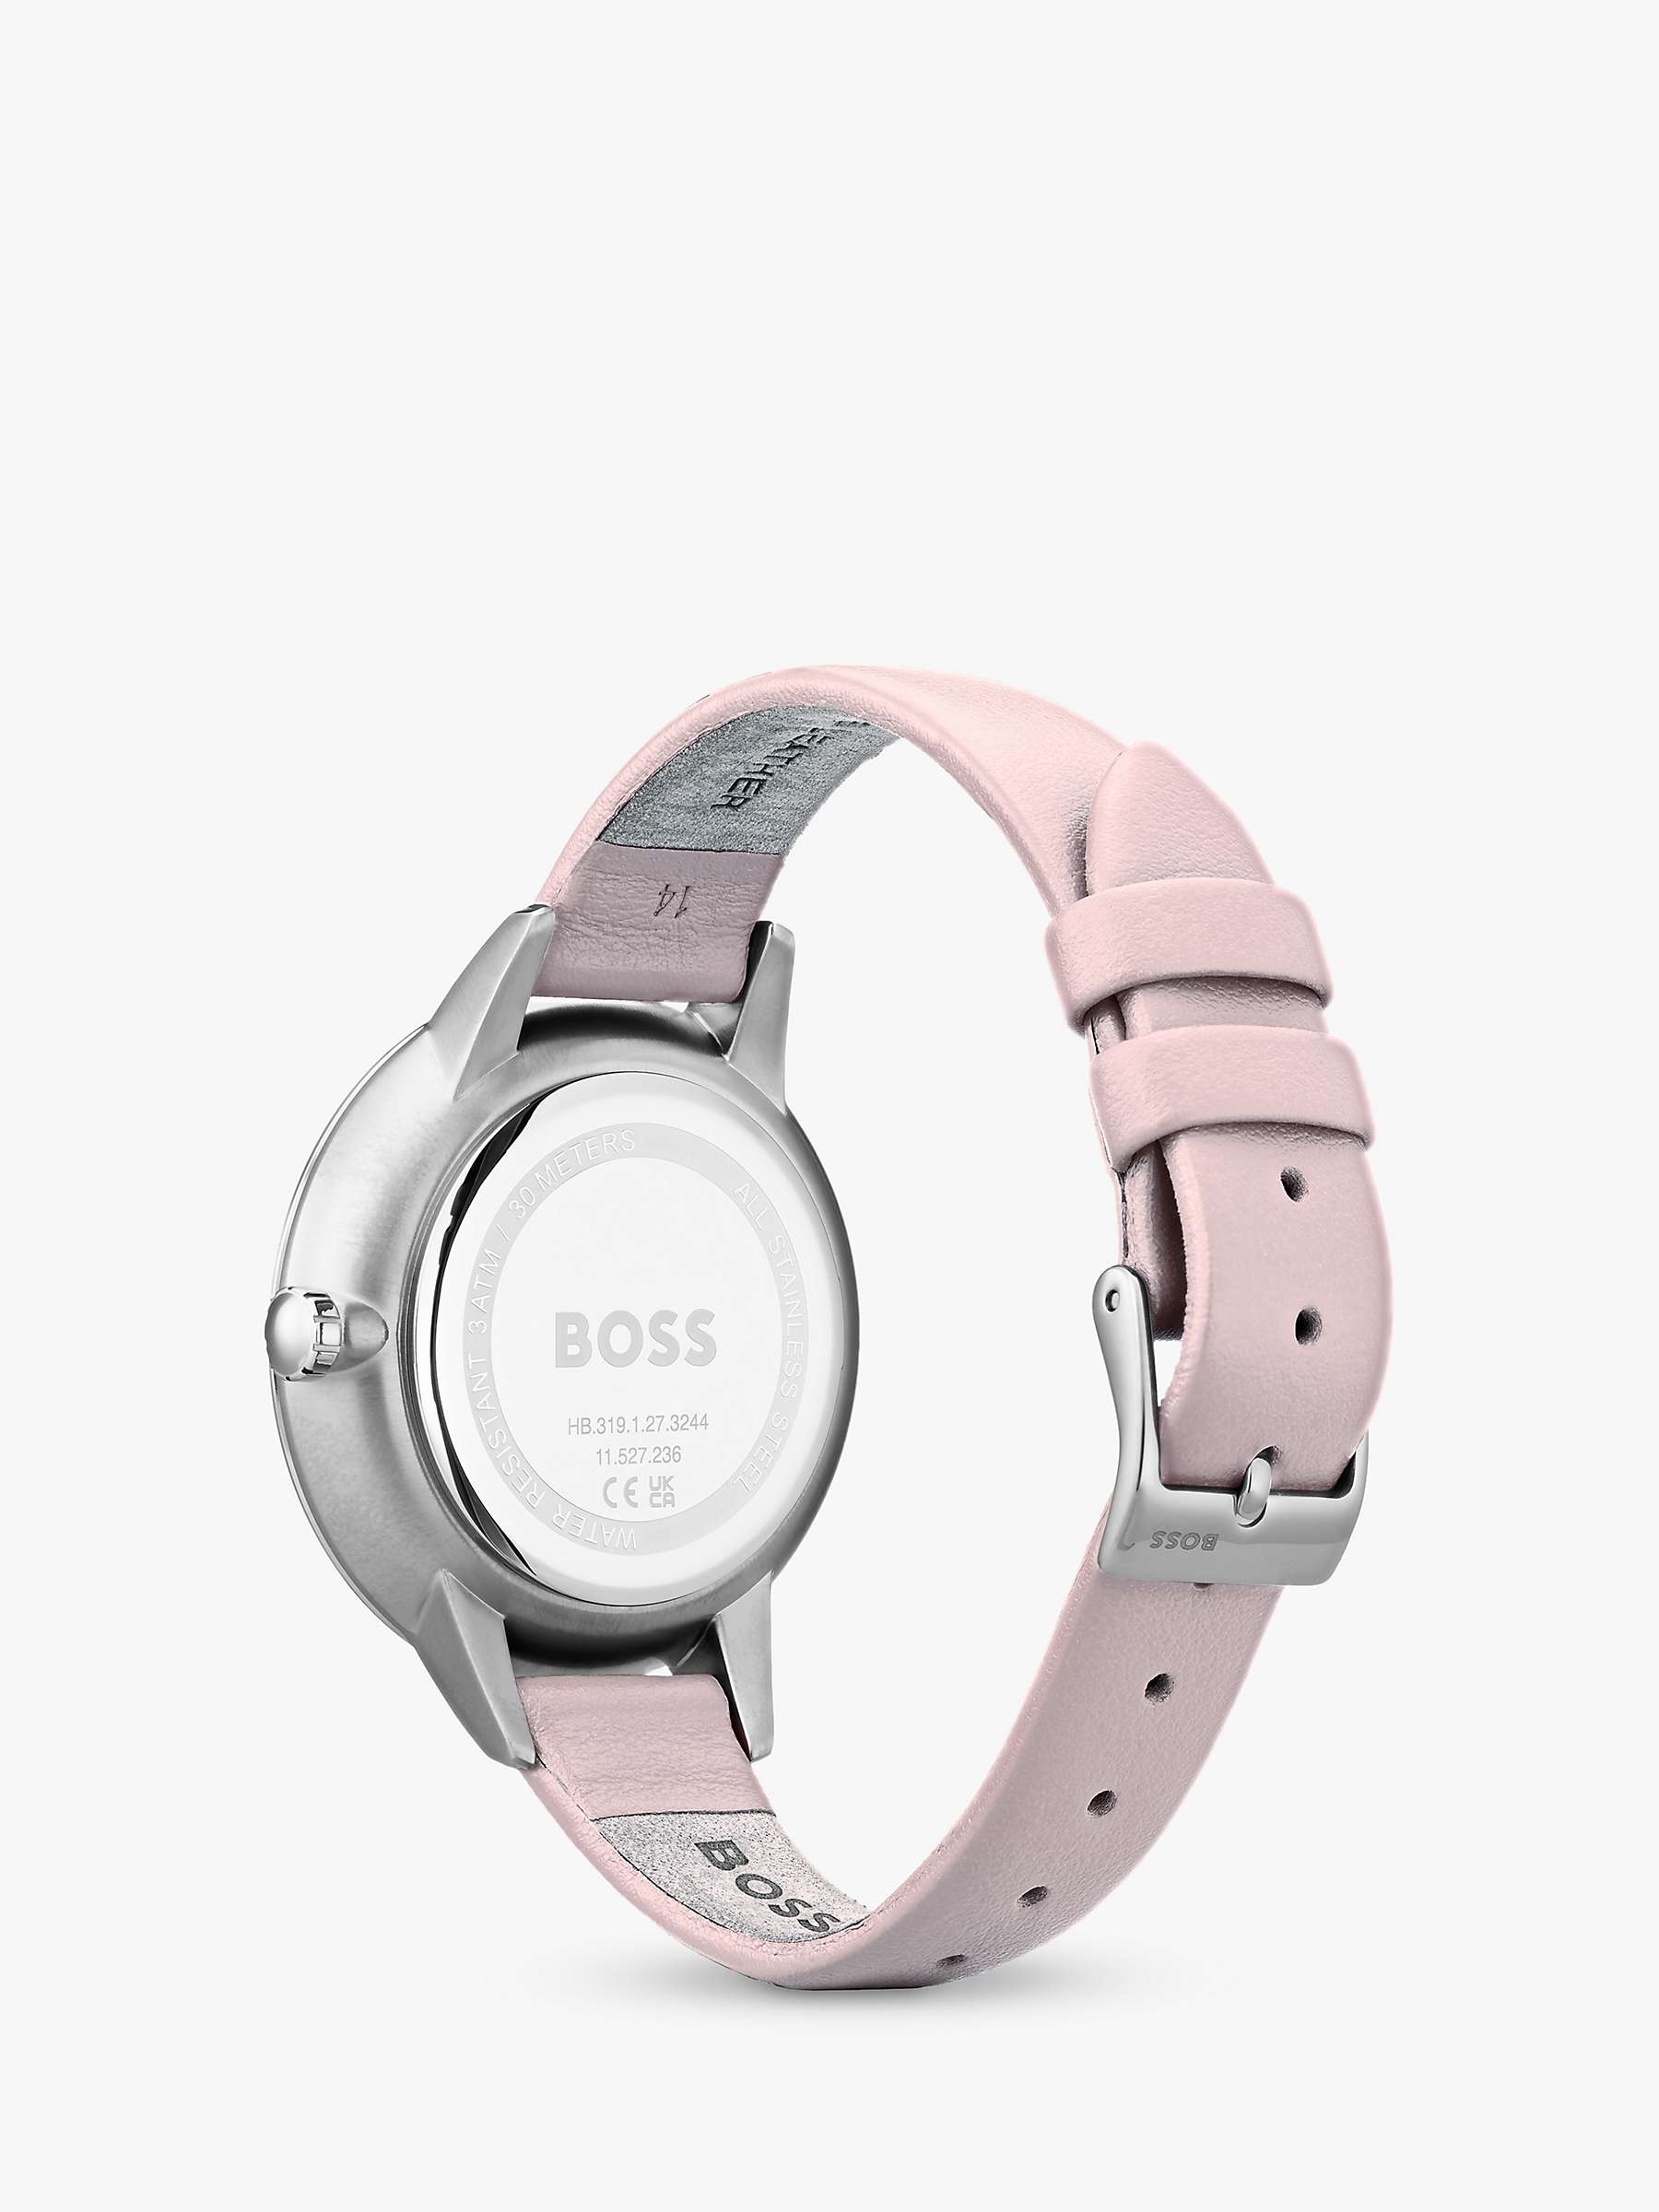 Buy BOSS 1502419 Women's Symphony Day Date Chronograph Leather Strap Watch, Pink/White Online at johnlewis.com